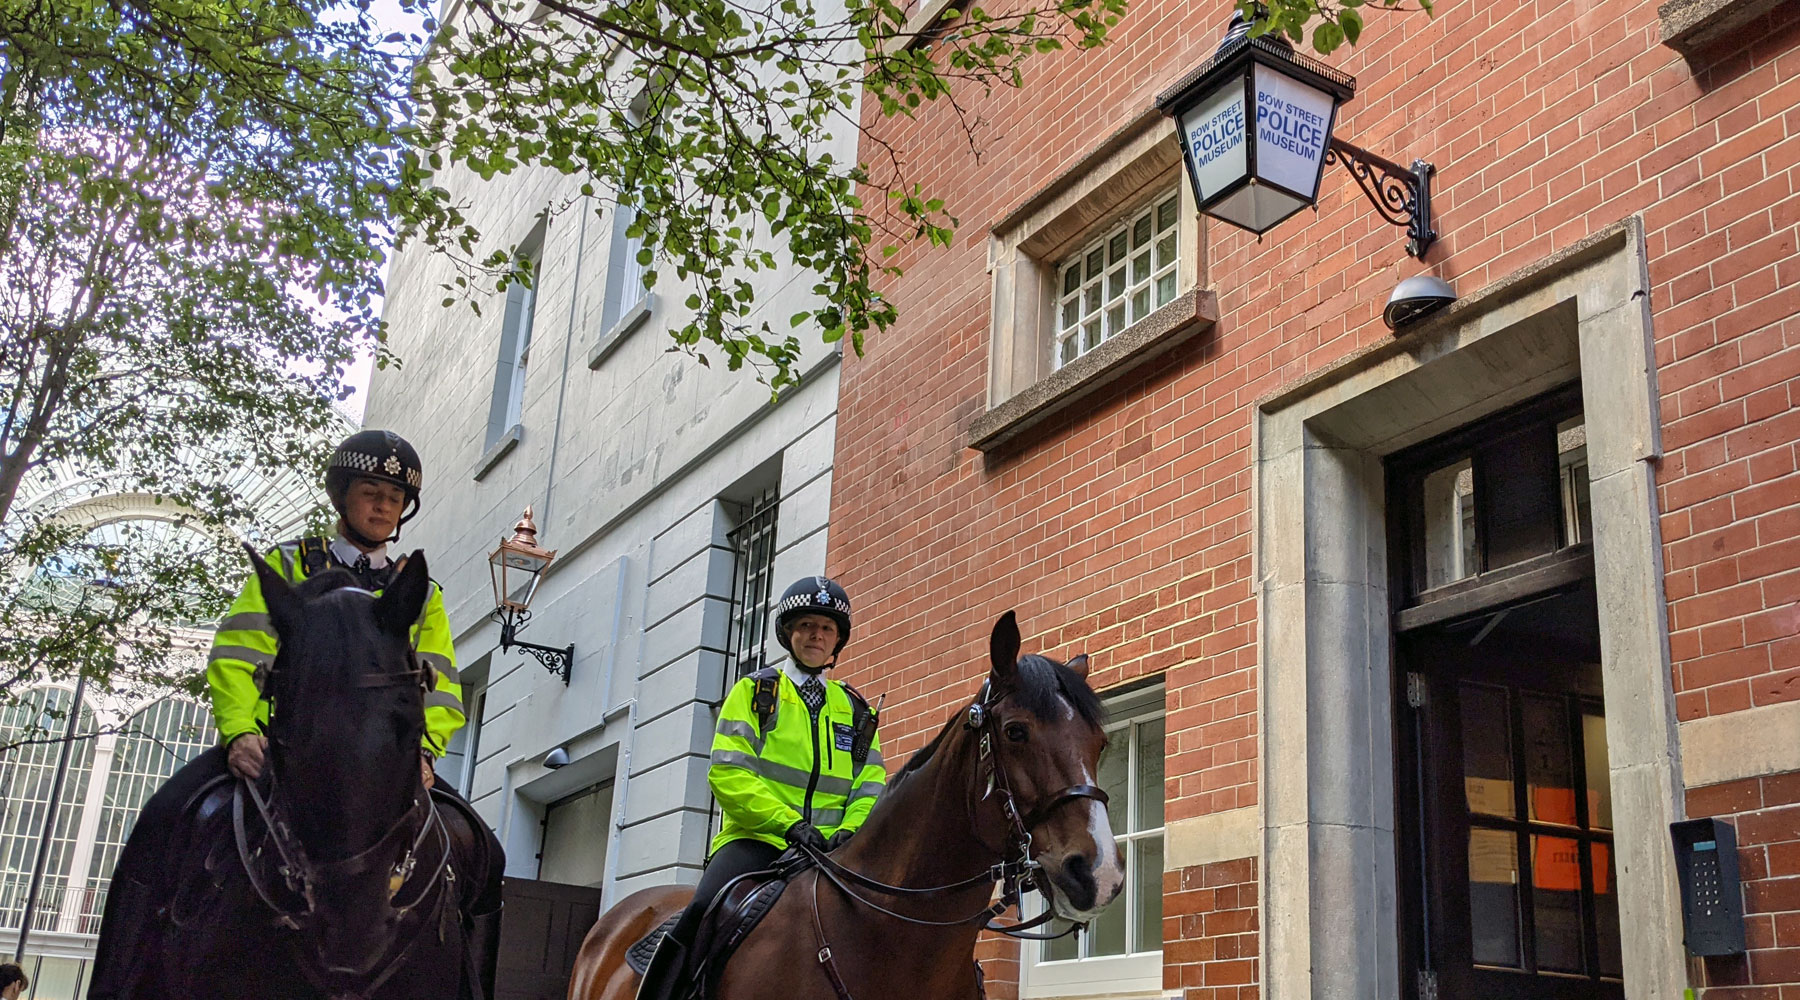 London's newest museum opens its cells - the Bow Street Police Museum